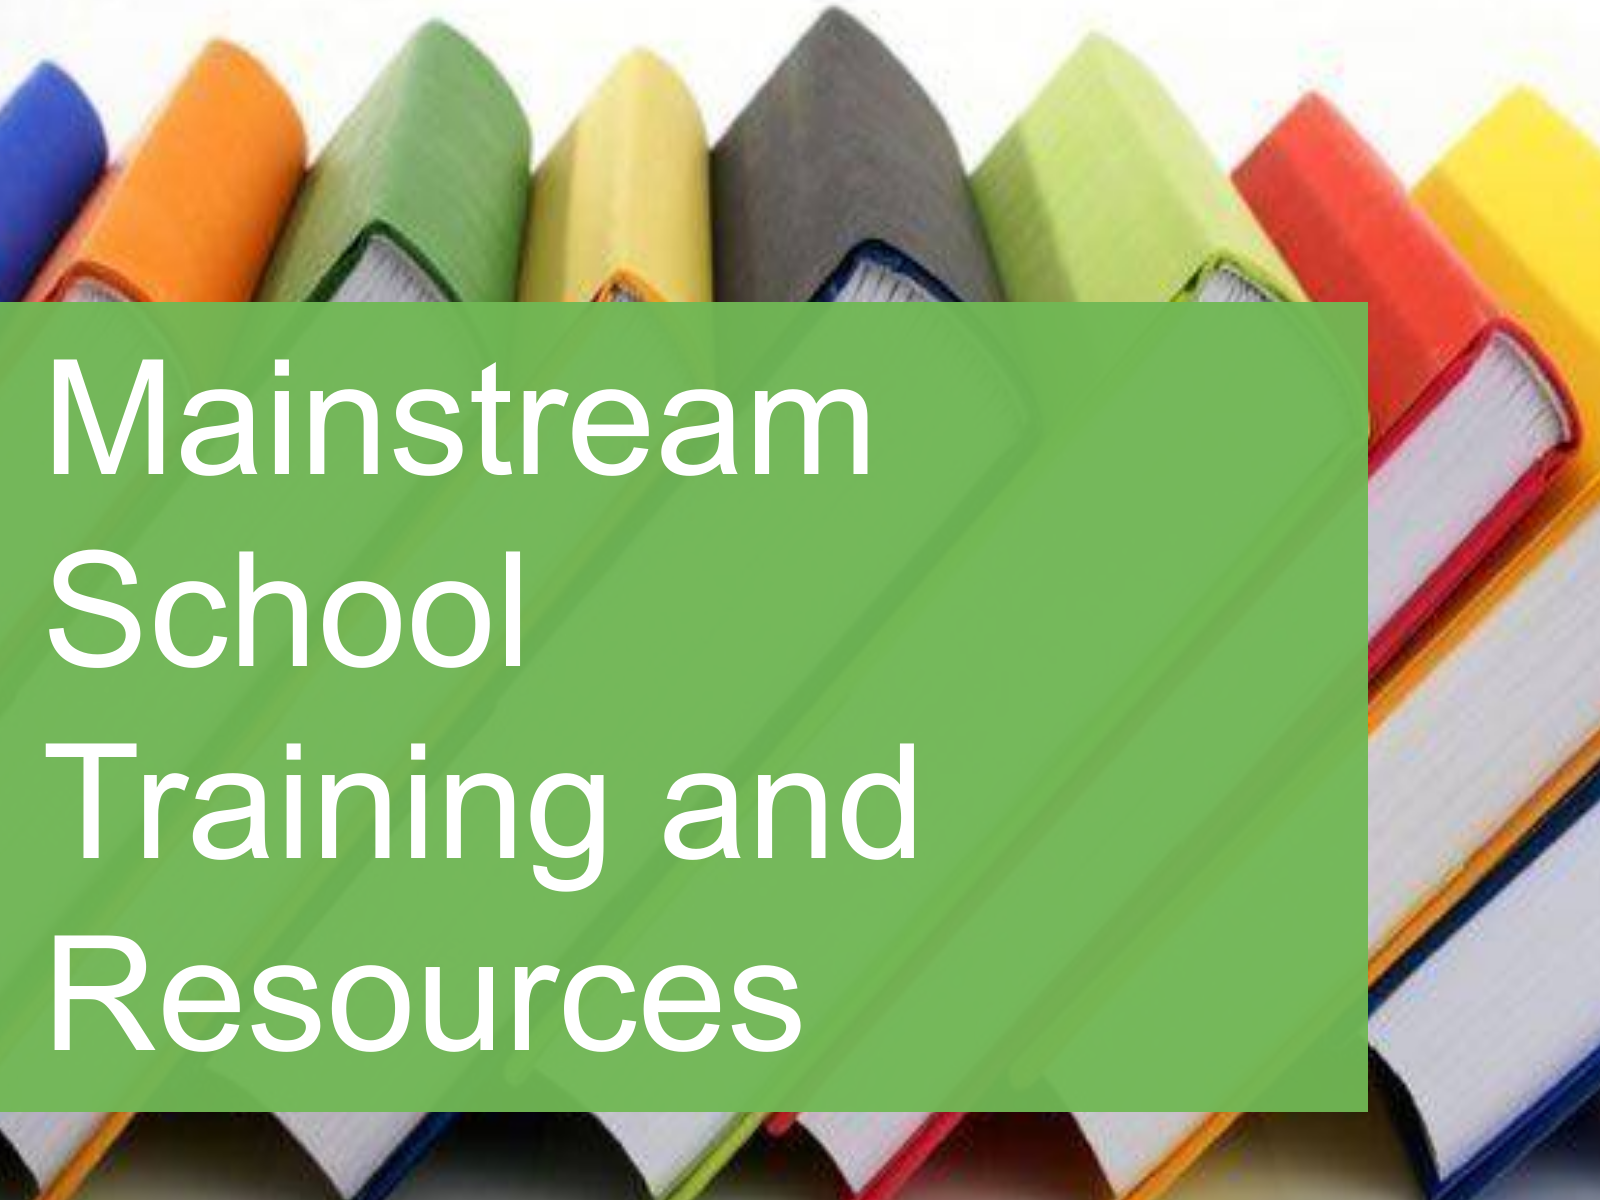 Mainstream School and Training Resources Tile